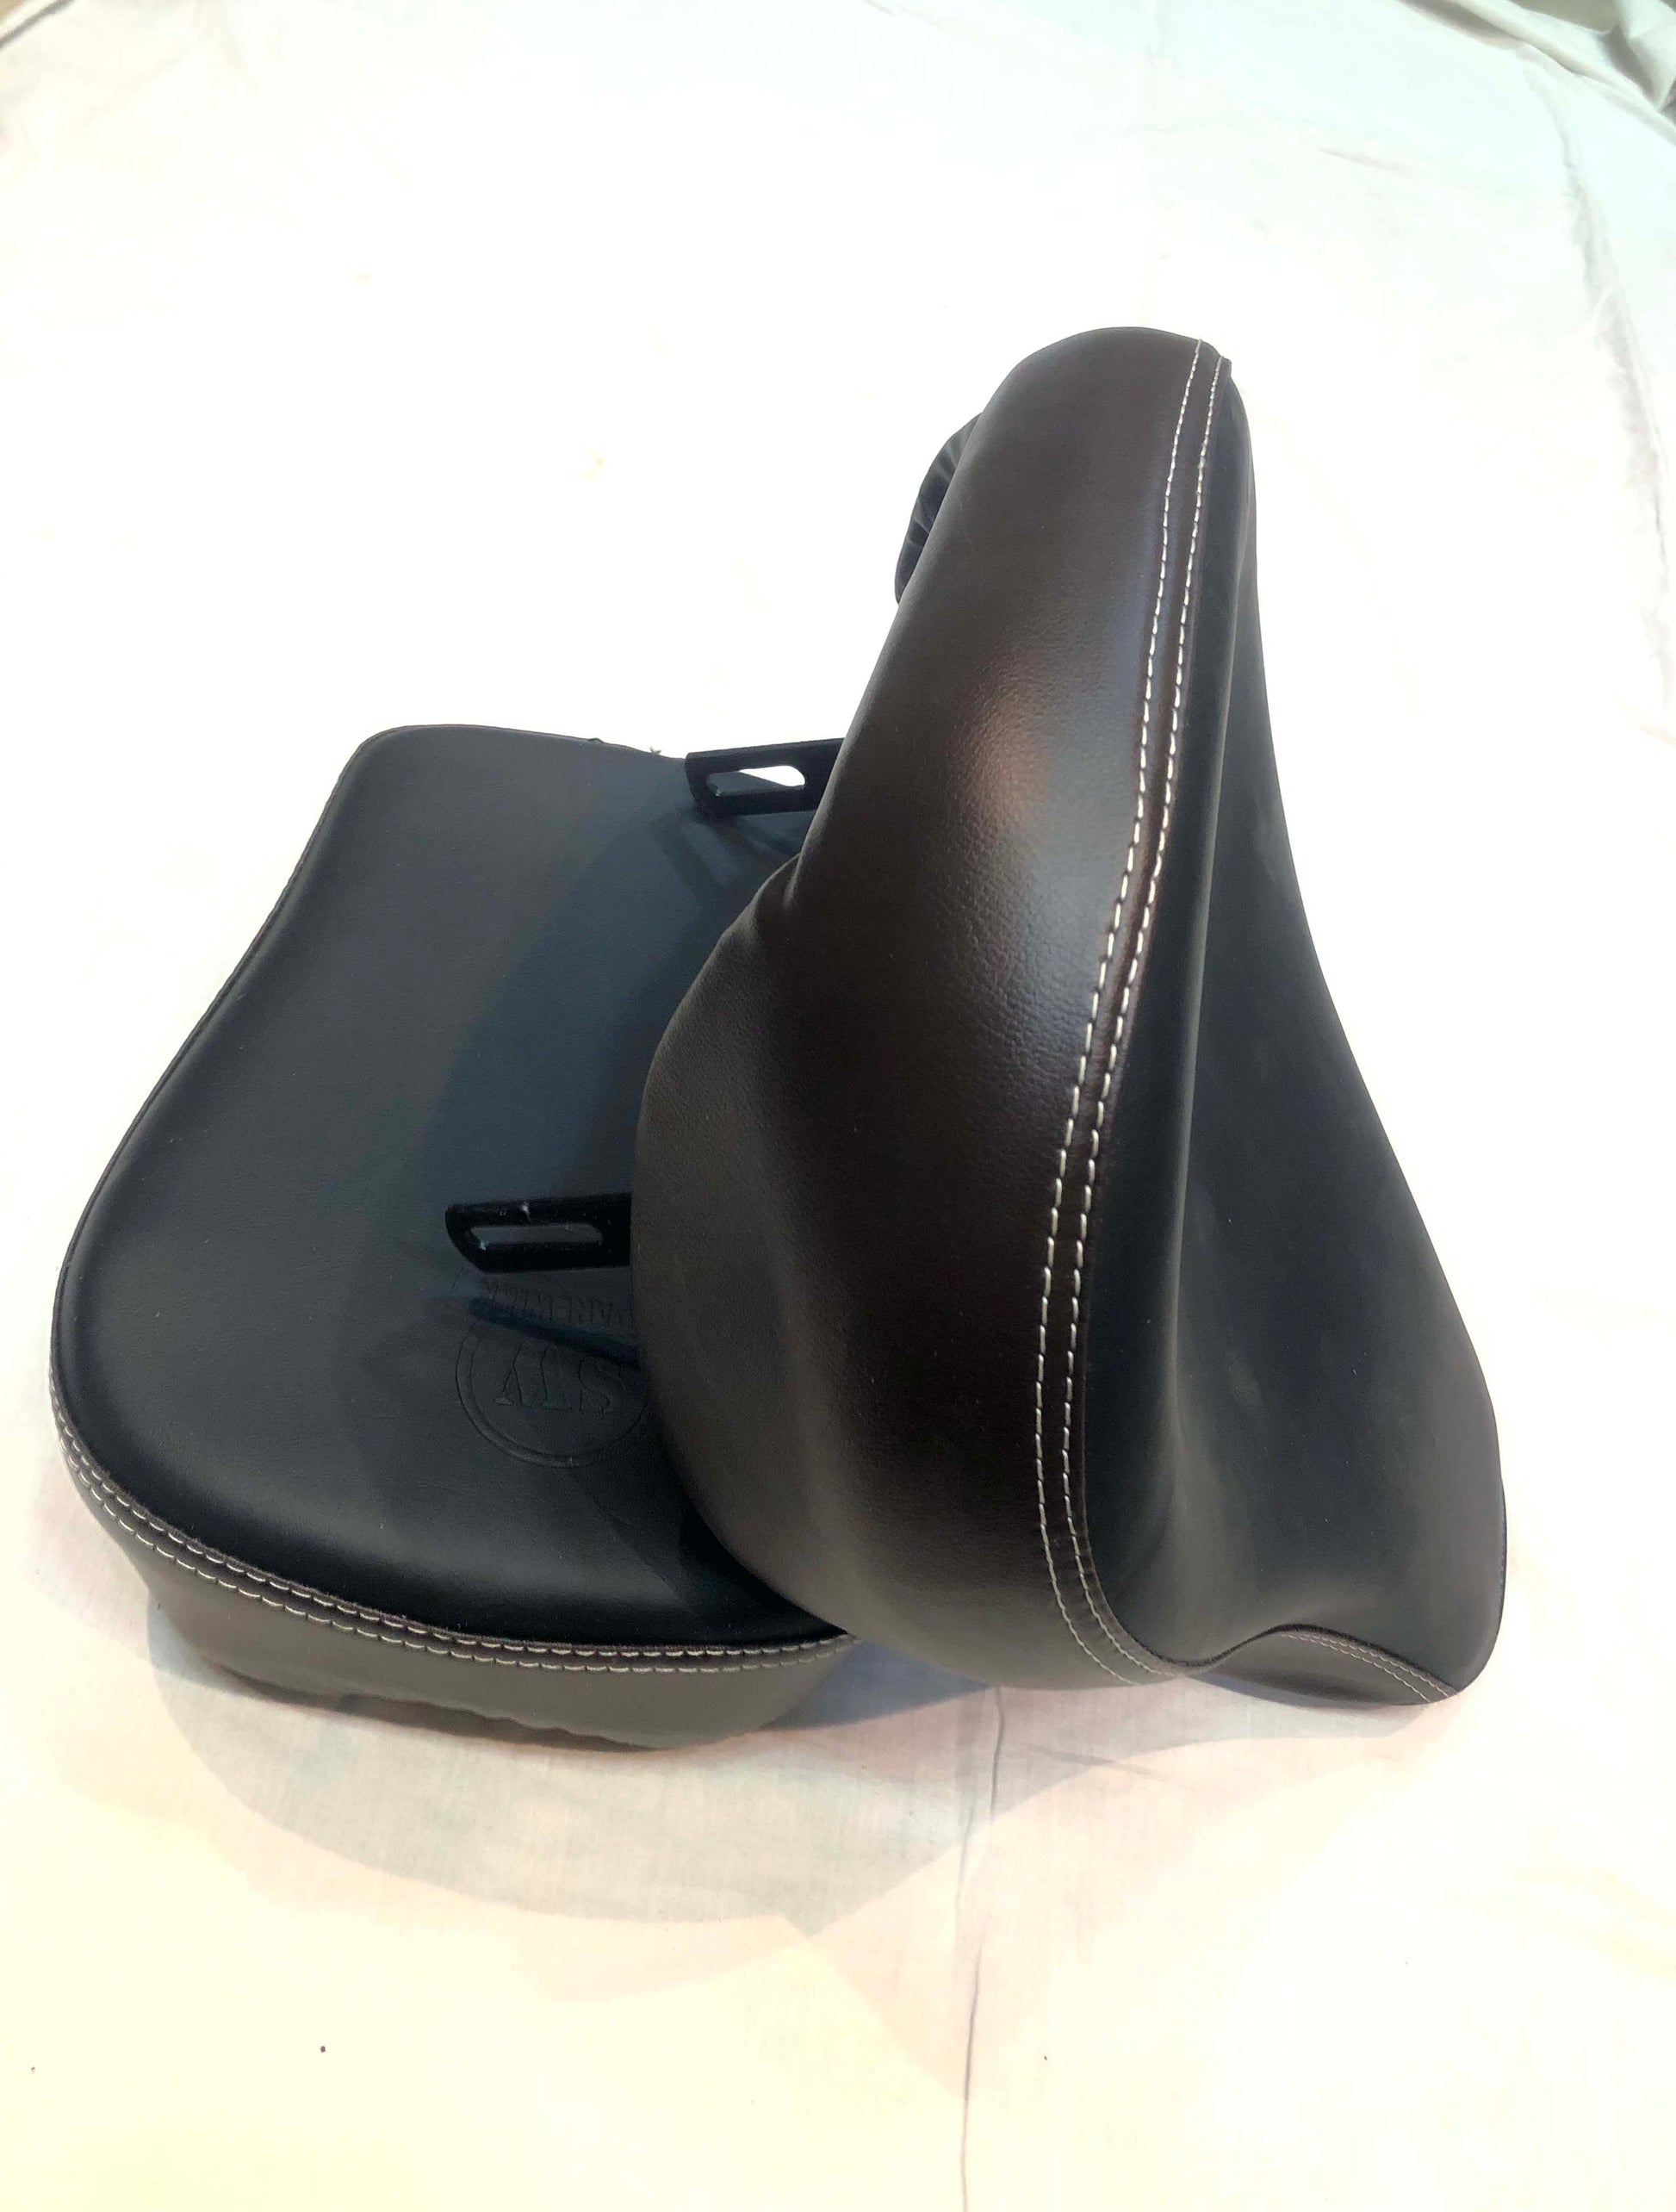 Bucket Seat- Black & Brown - Premium Seats from Sparewick - Just Rs. 2500! Shop now at Sparewick